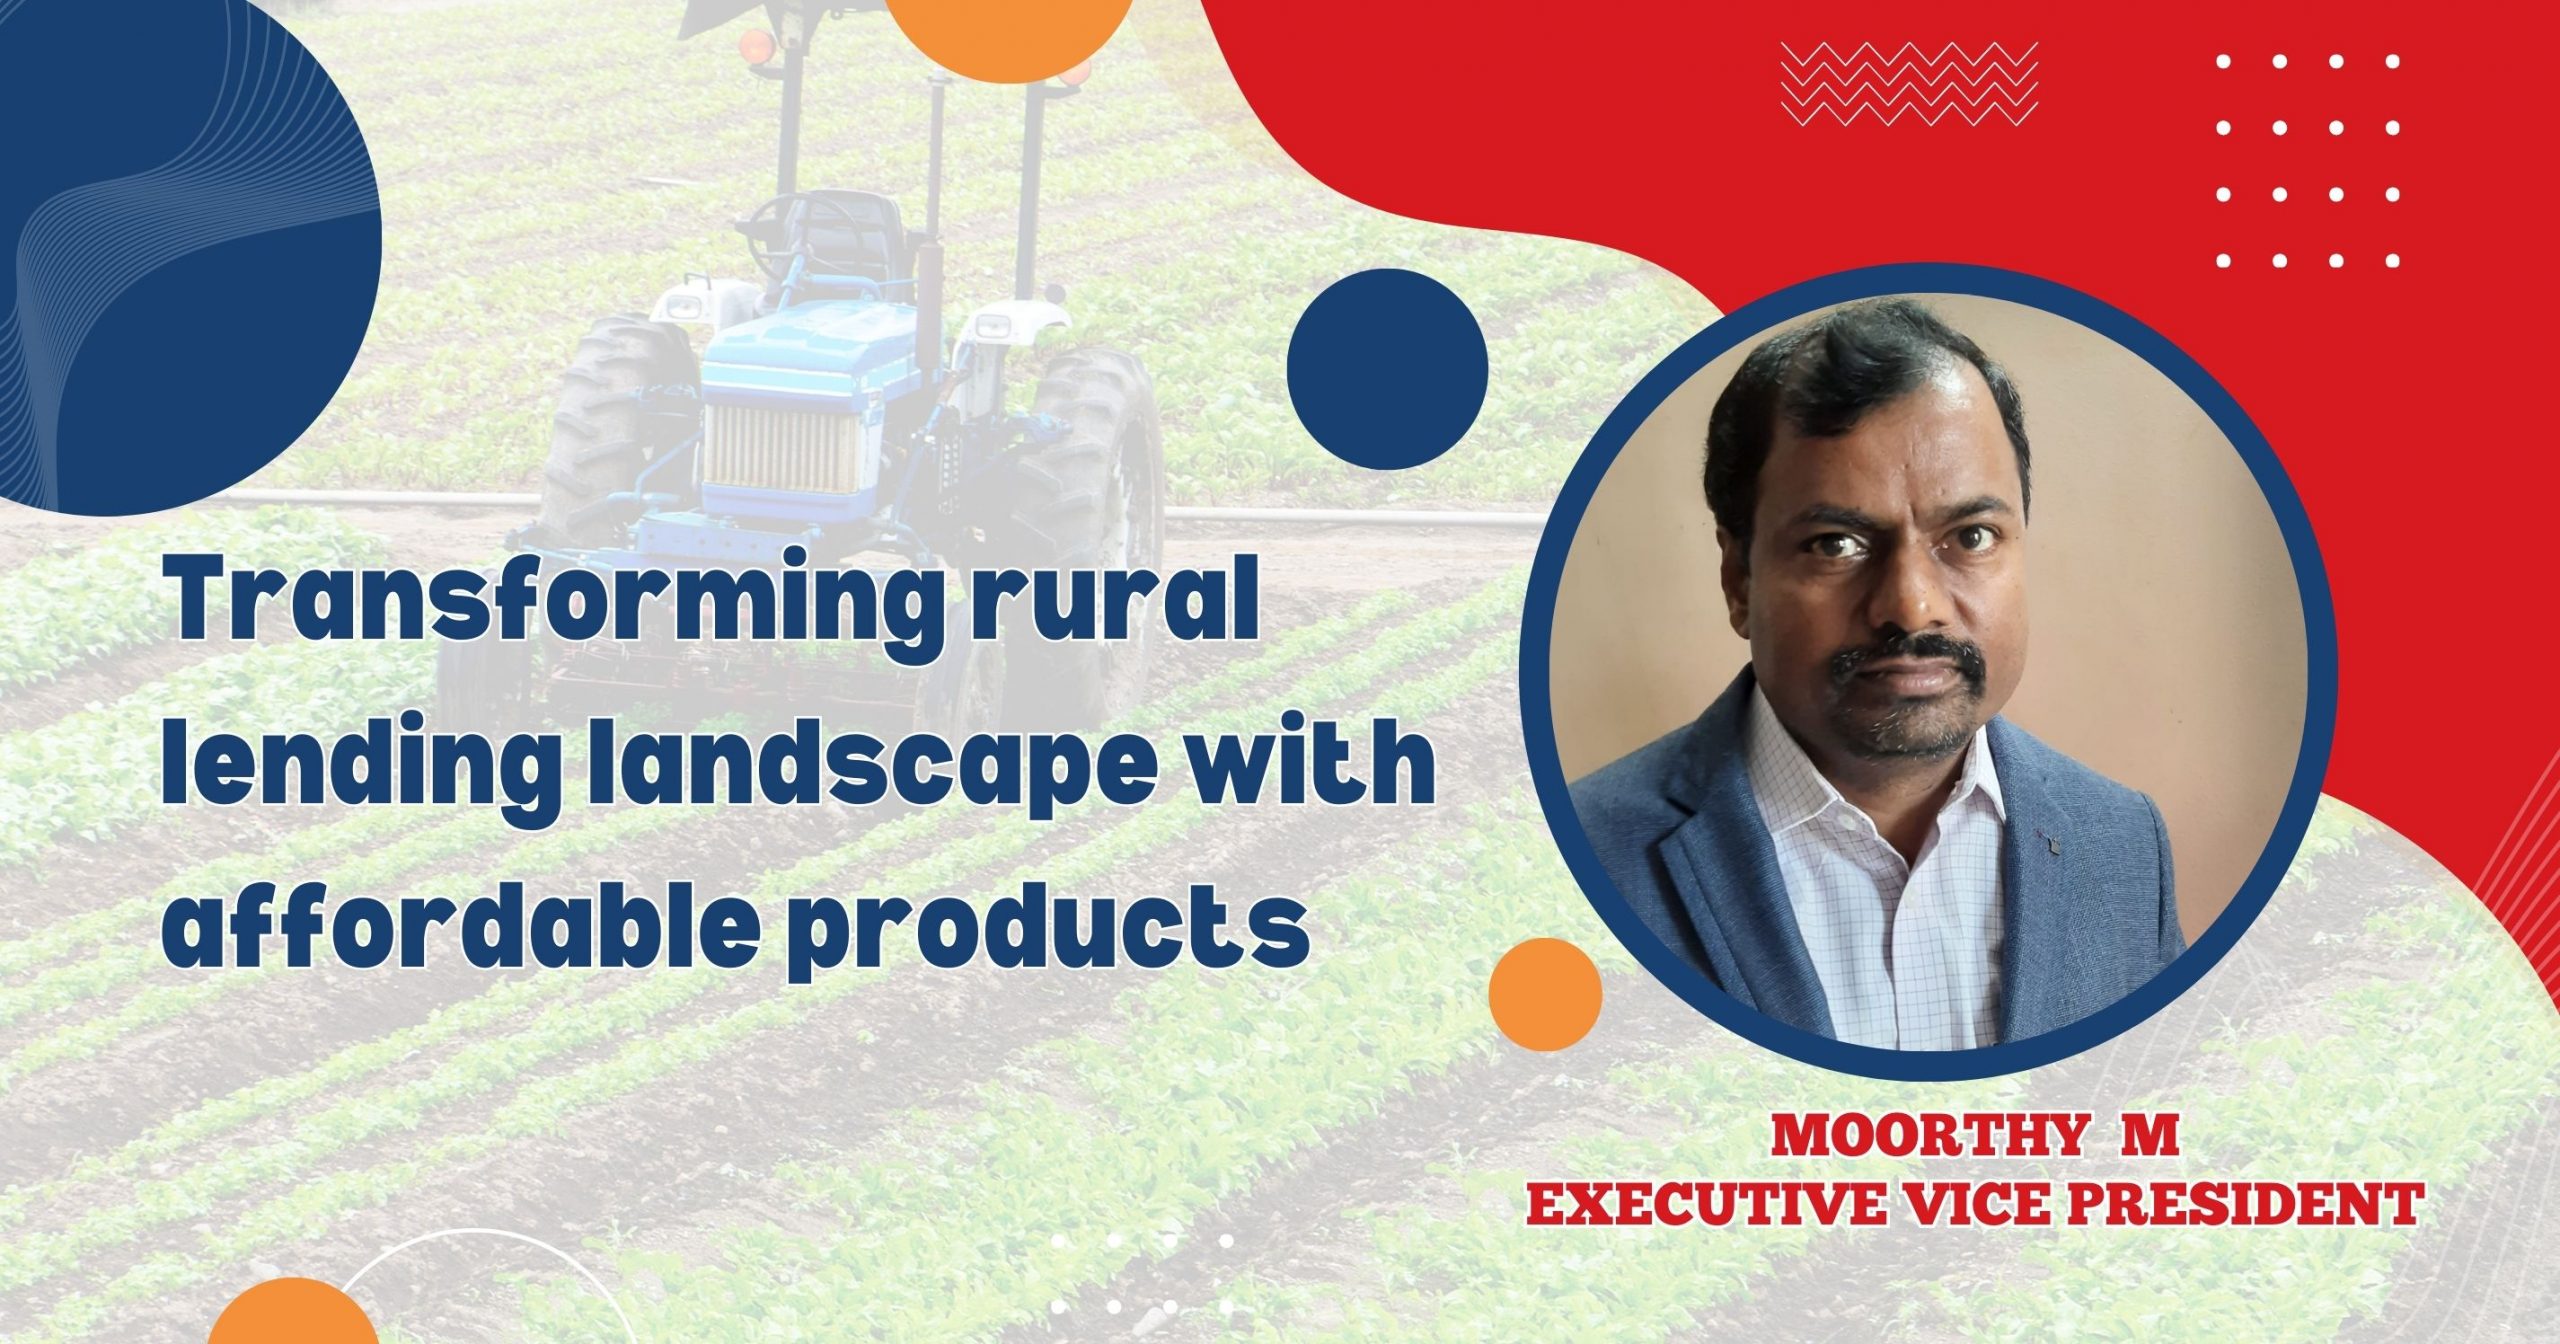 Transforming rural lending landscape with affordable products